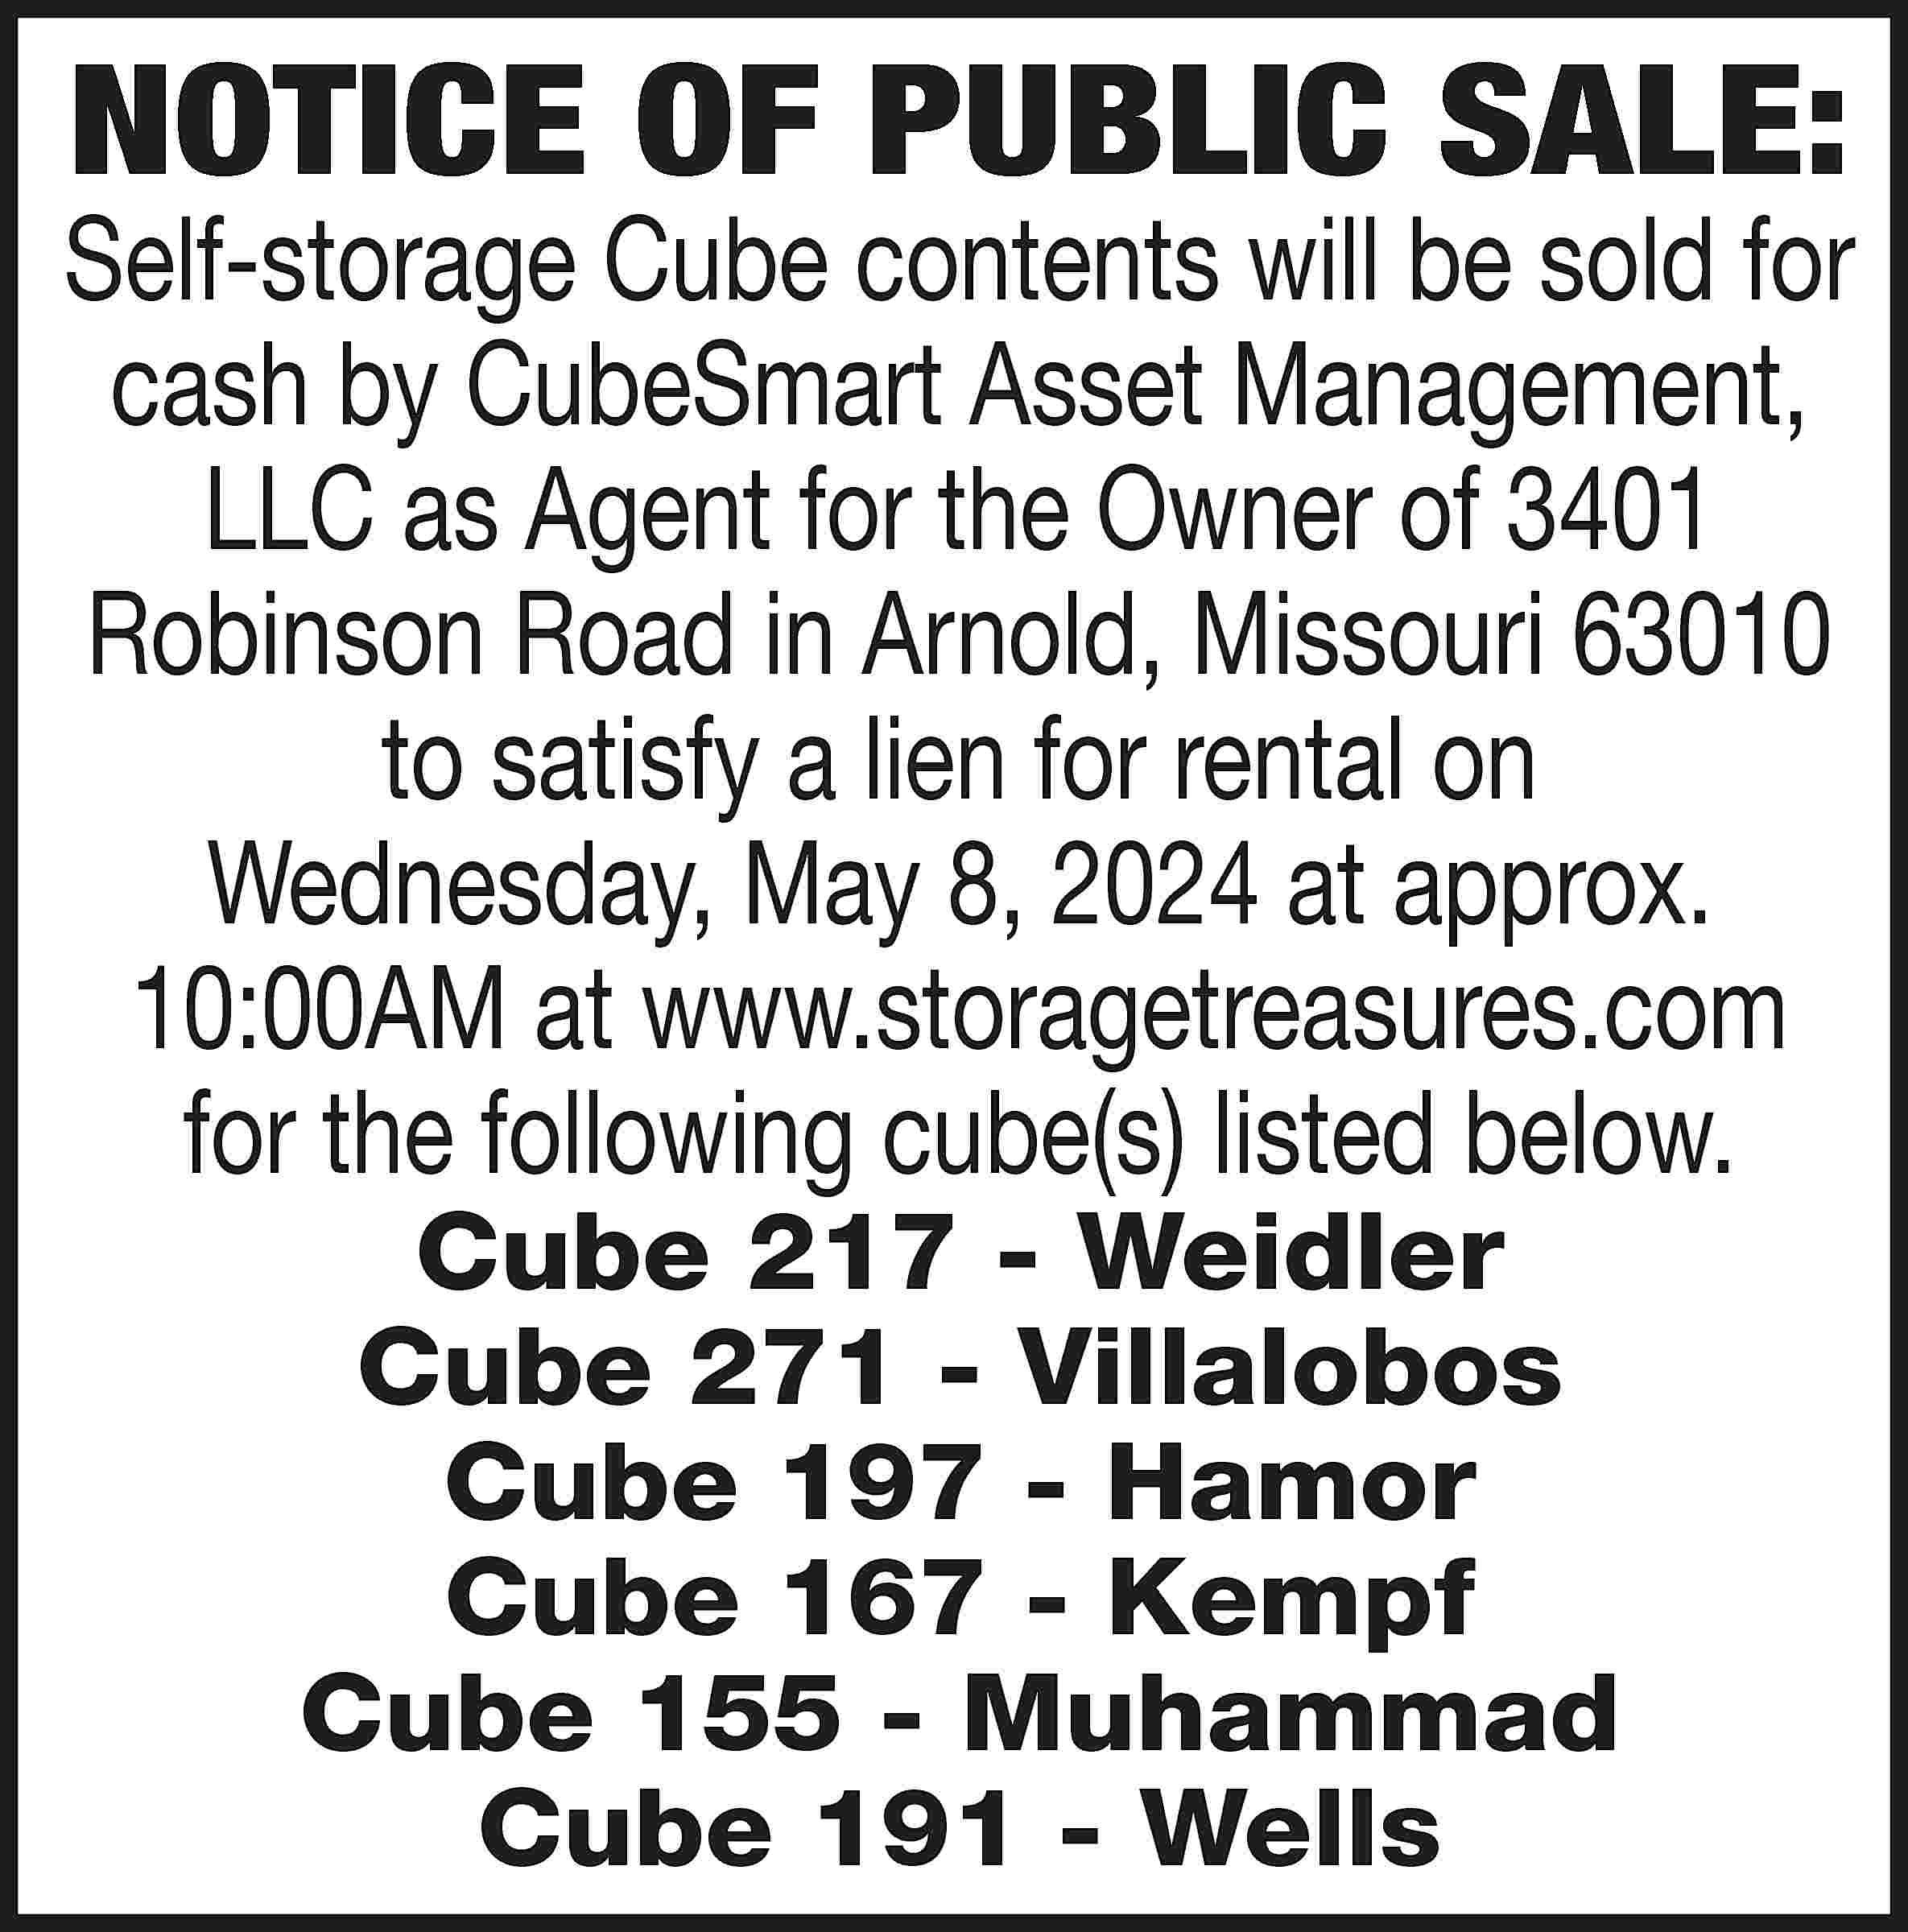 NOTICE OF PUBLIC SALE: Self-storage  NOTICE OF PUBLIC SALE: Self-storage Cube contents will be sold for cash by CubeSmart Asset Management, LLC as Agent for the Owner of 3401 Robinson Road in Arnold, Missouri 63010 to satisfy a lien for rental on Wednesday, May 8, 2024 at approx. 10:00AM at www.storagetreasures.com for the following cube(s) listed below. Cube 217 - Weidler Cube 271 - Villalobos Cube 197 - Hamor Cube 167 - Kempf Cube 155 - Muhammad Cube 191 - Wells